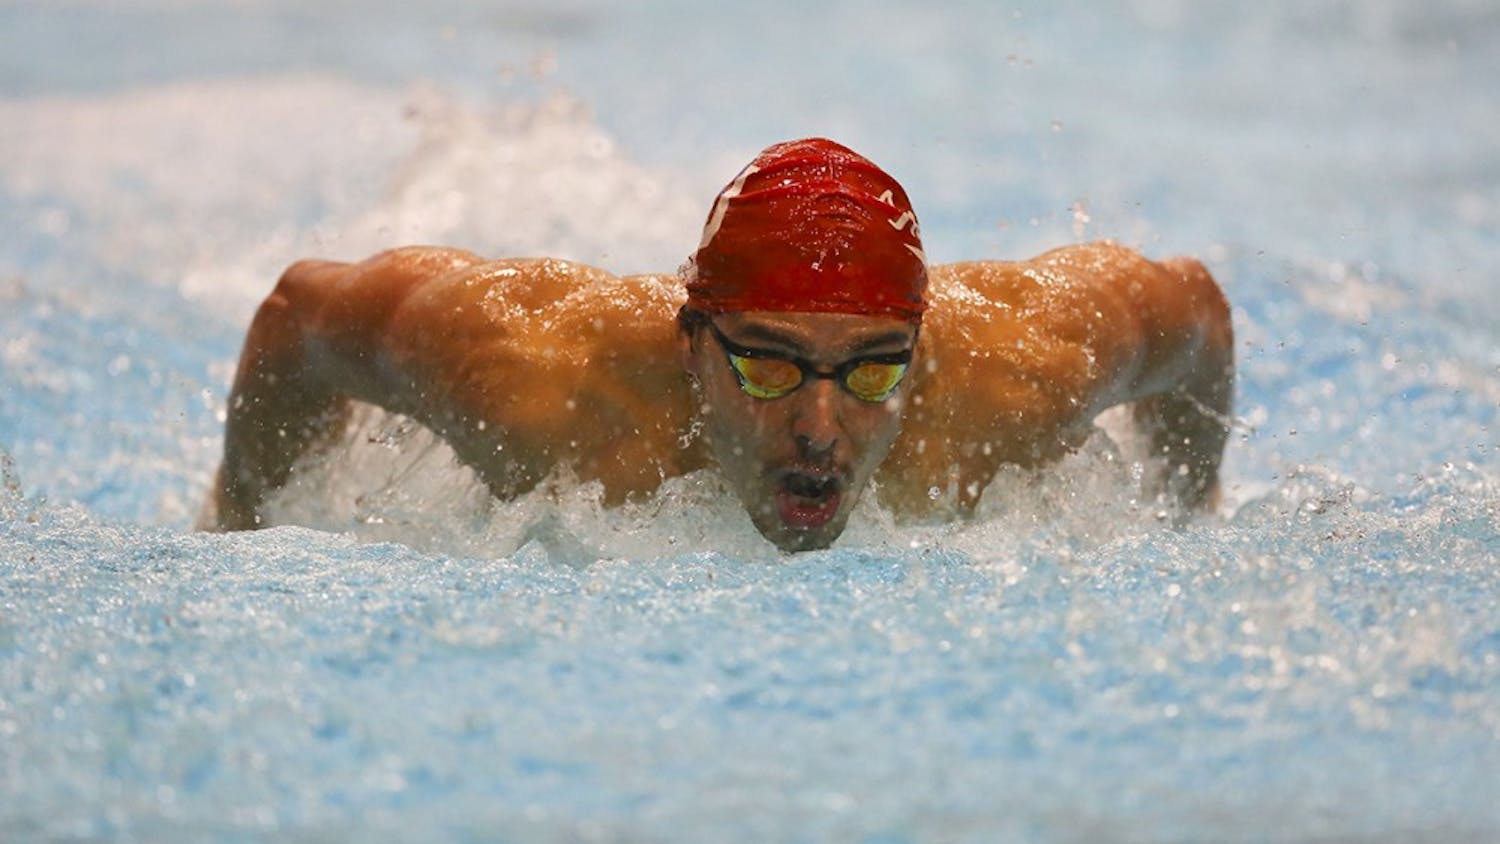 Junior swimmer Vini Lanza competes in the men's 200m butterfly heat during IU's meet against Louisville last season. Lanza is a part of the IU men's swimming and diving team that has gotten off to a 6-0 start this season.